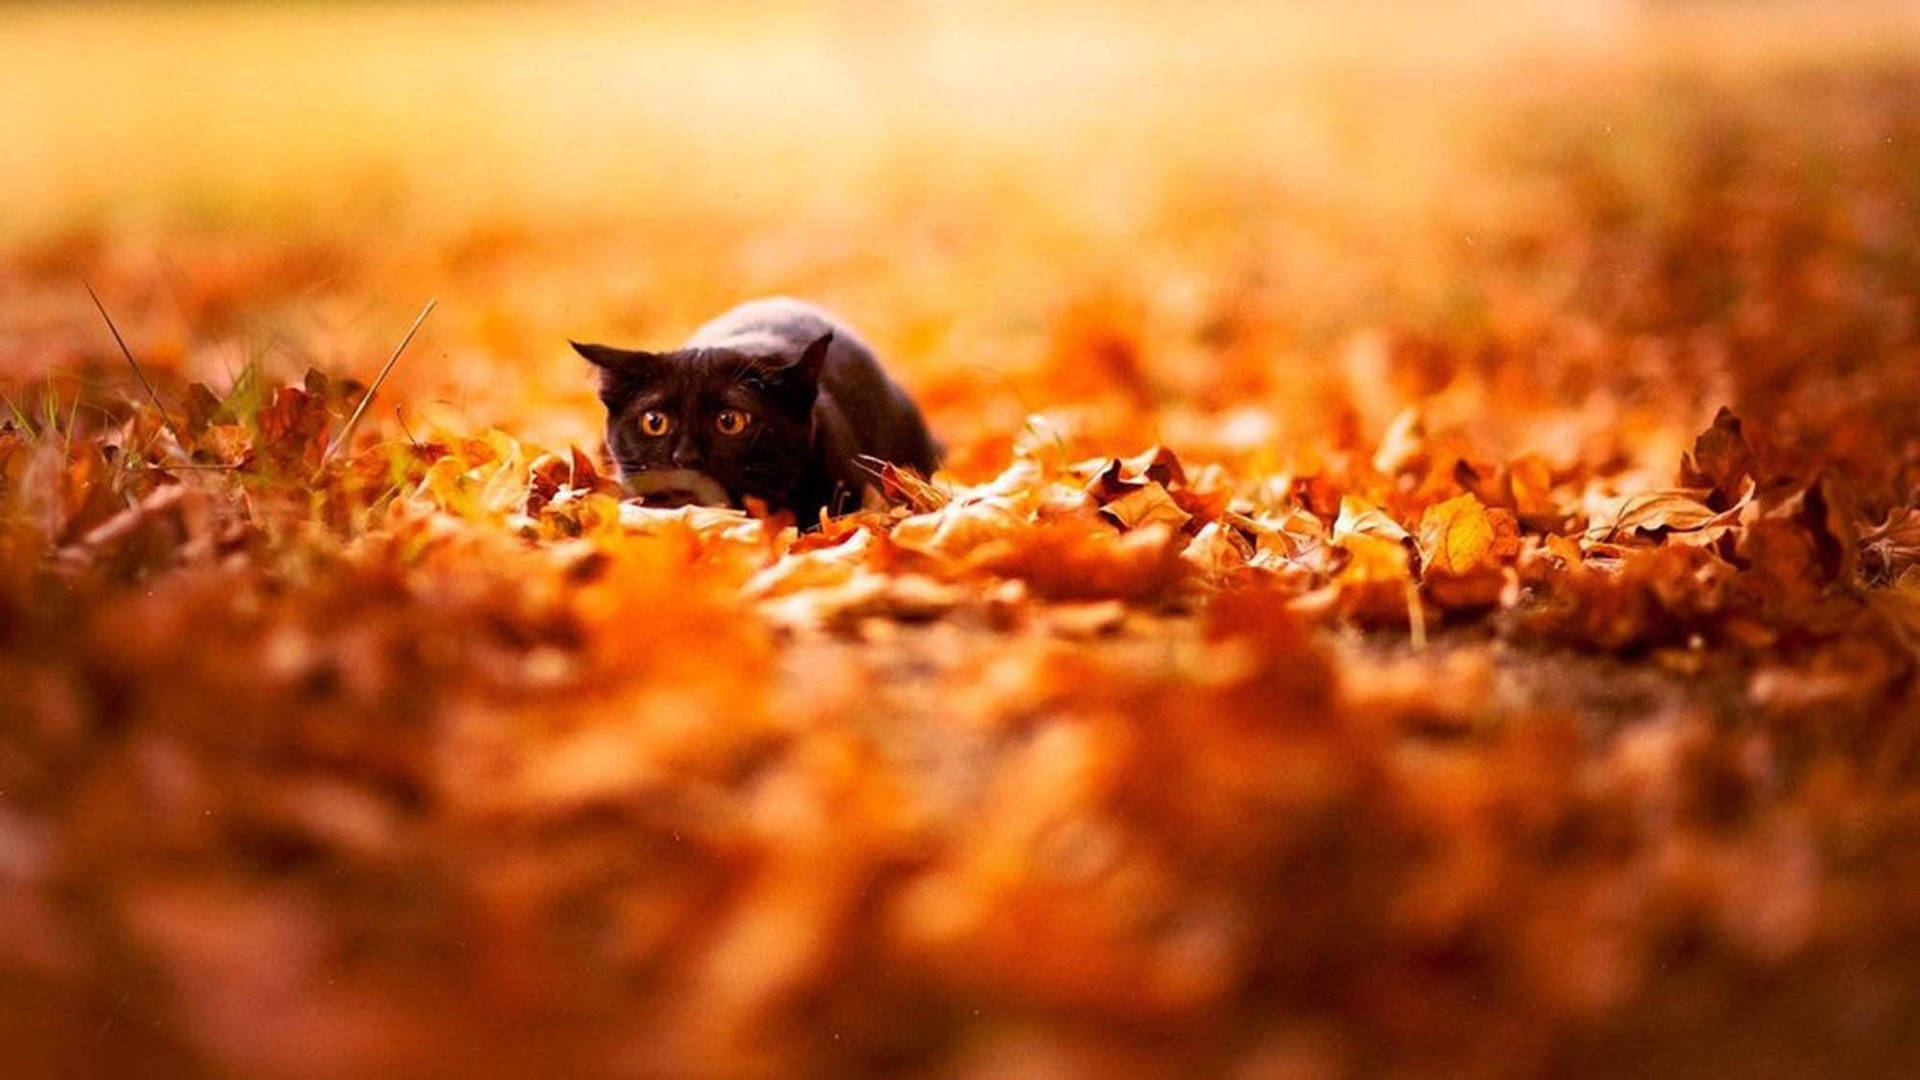 Cute Fall Aesthetic Image Of Cat Background